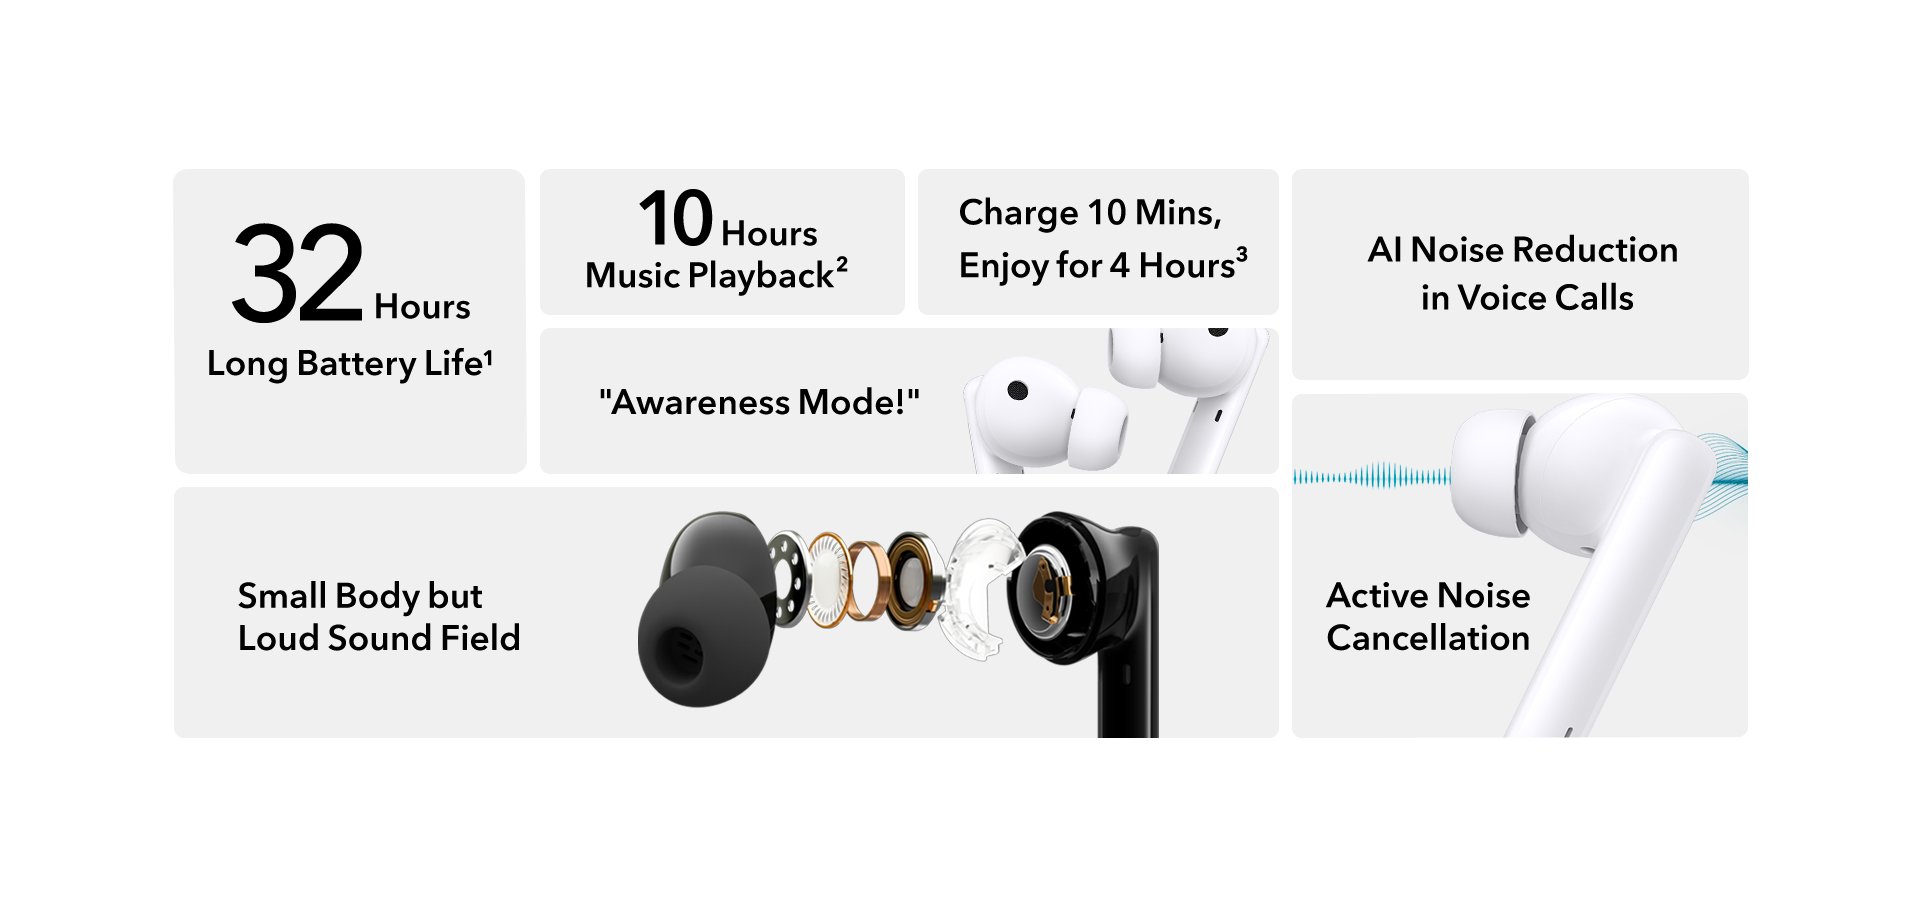 HONOR Earbuds 2 Lite: Fast charge. AI noise reduction in voice calls. Small in size but loud in sound